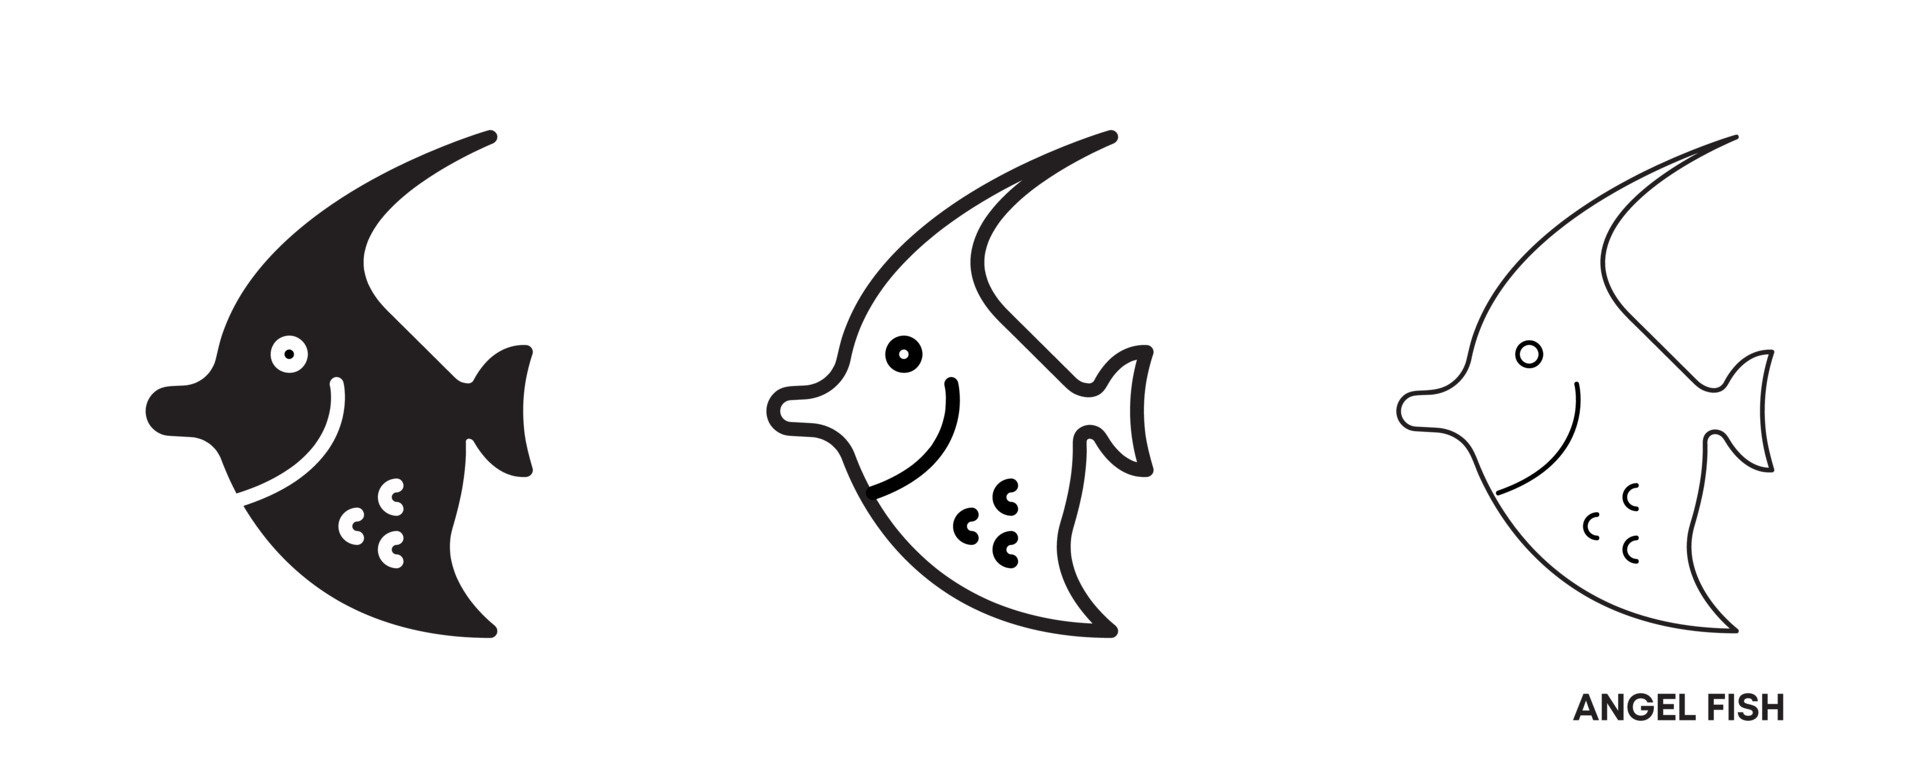 Angel fish line icon set. Such icons include thin, thick and silhouette  Angel fish icon set. Editable line. Fish icon. Fish logo template. Creative  vector symbol of fishing club or online web